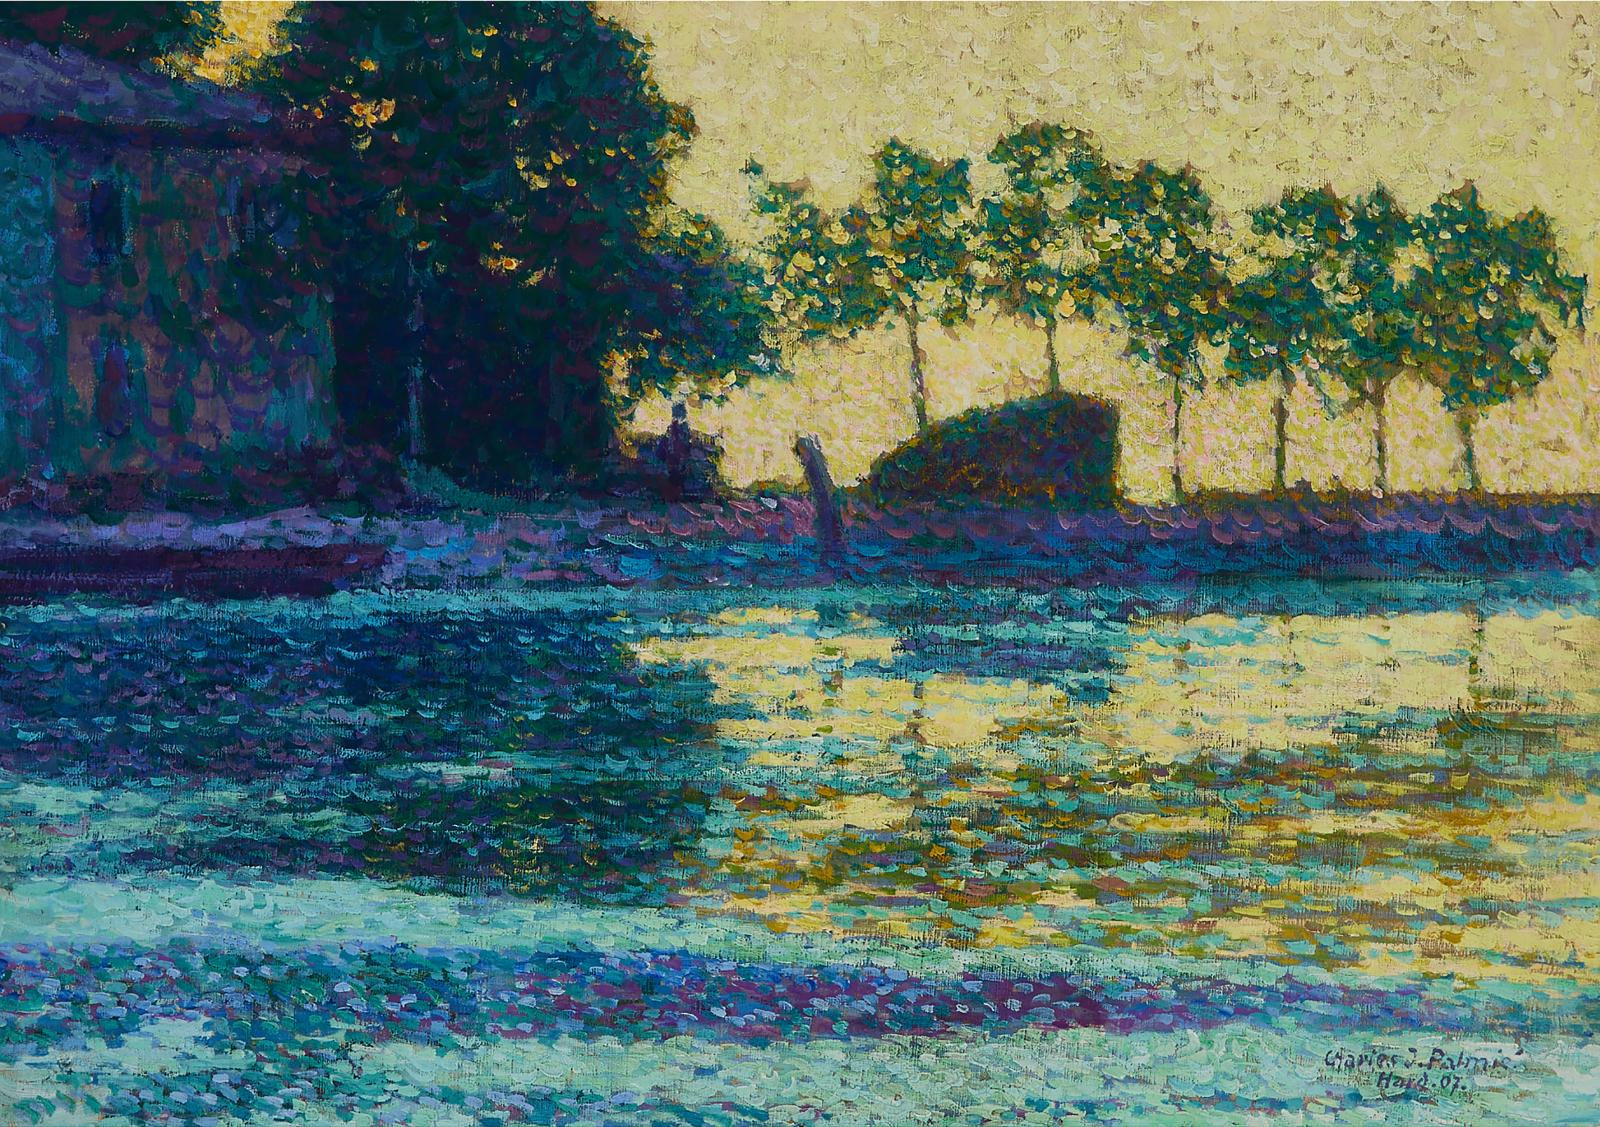 Charles Johann Palmie (1863-1911) - Summer Day On The Hard River, Germany, 1907